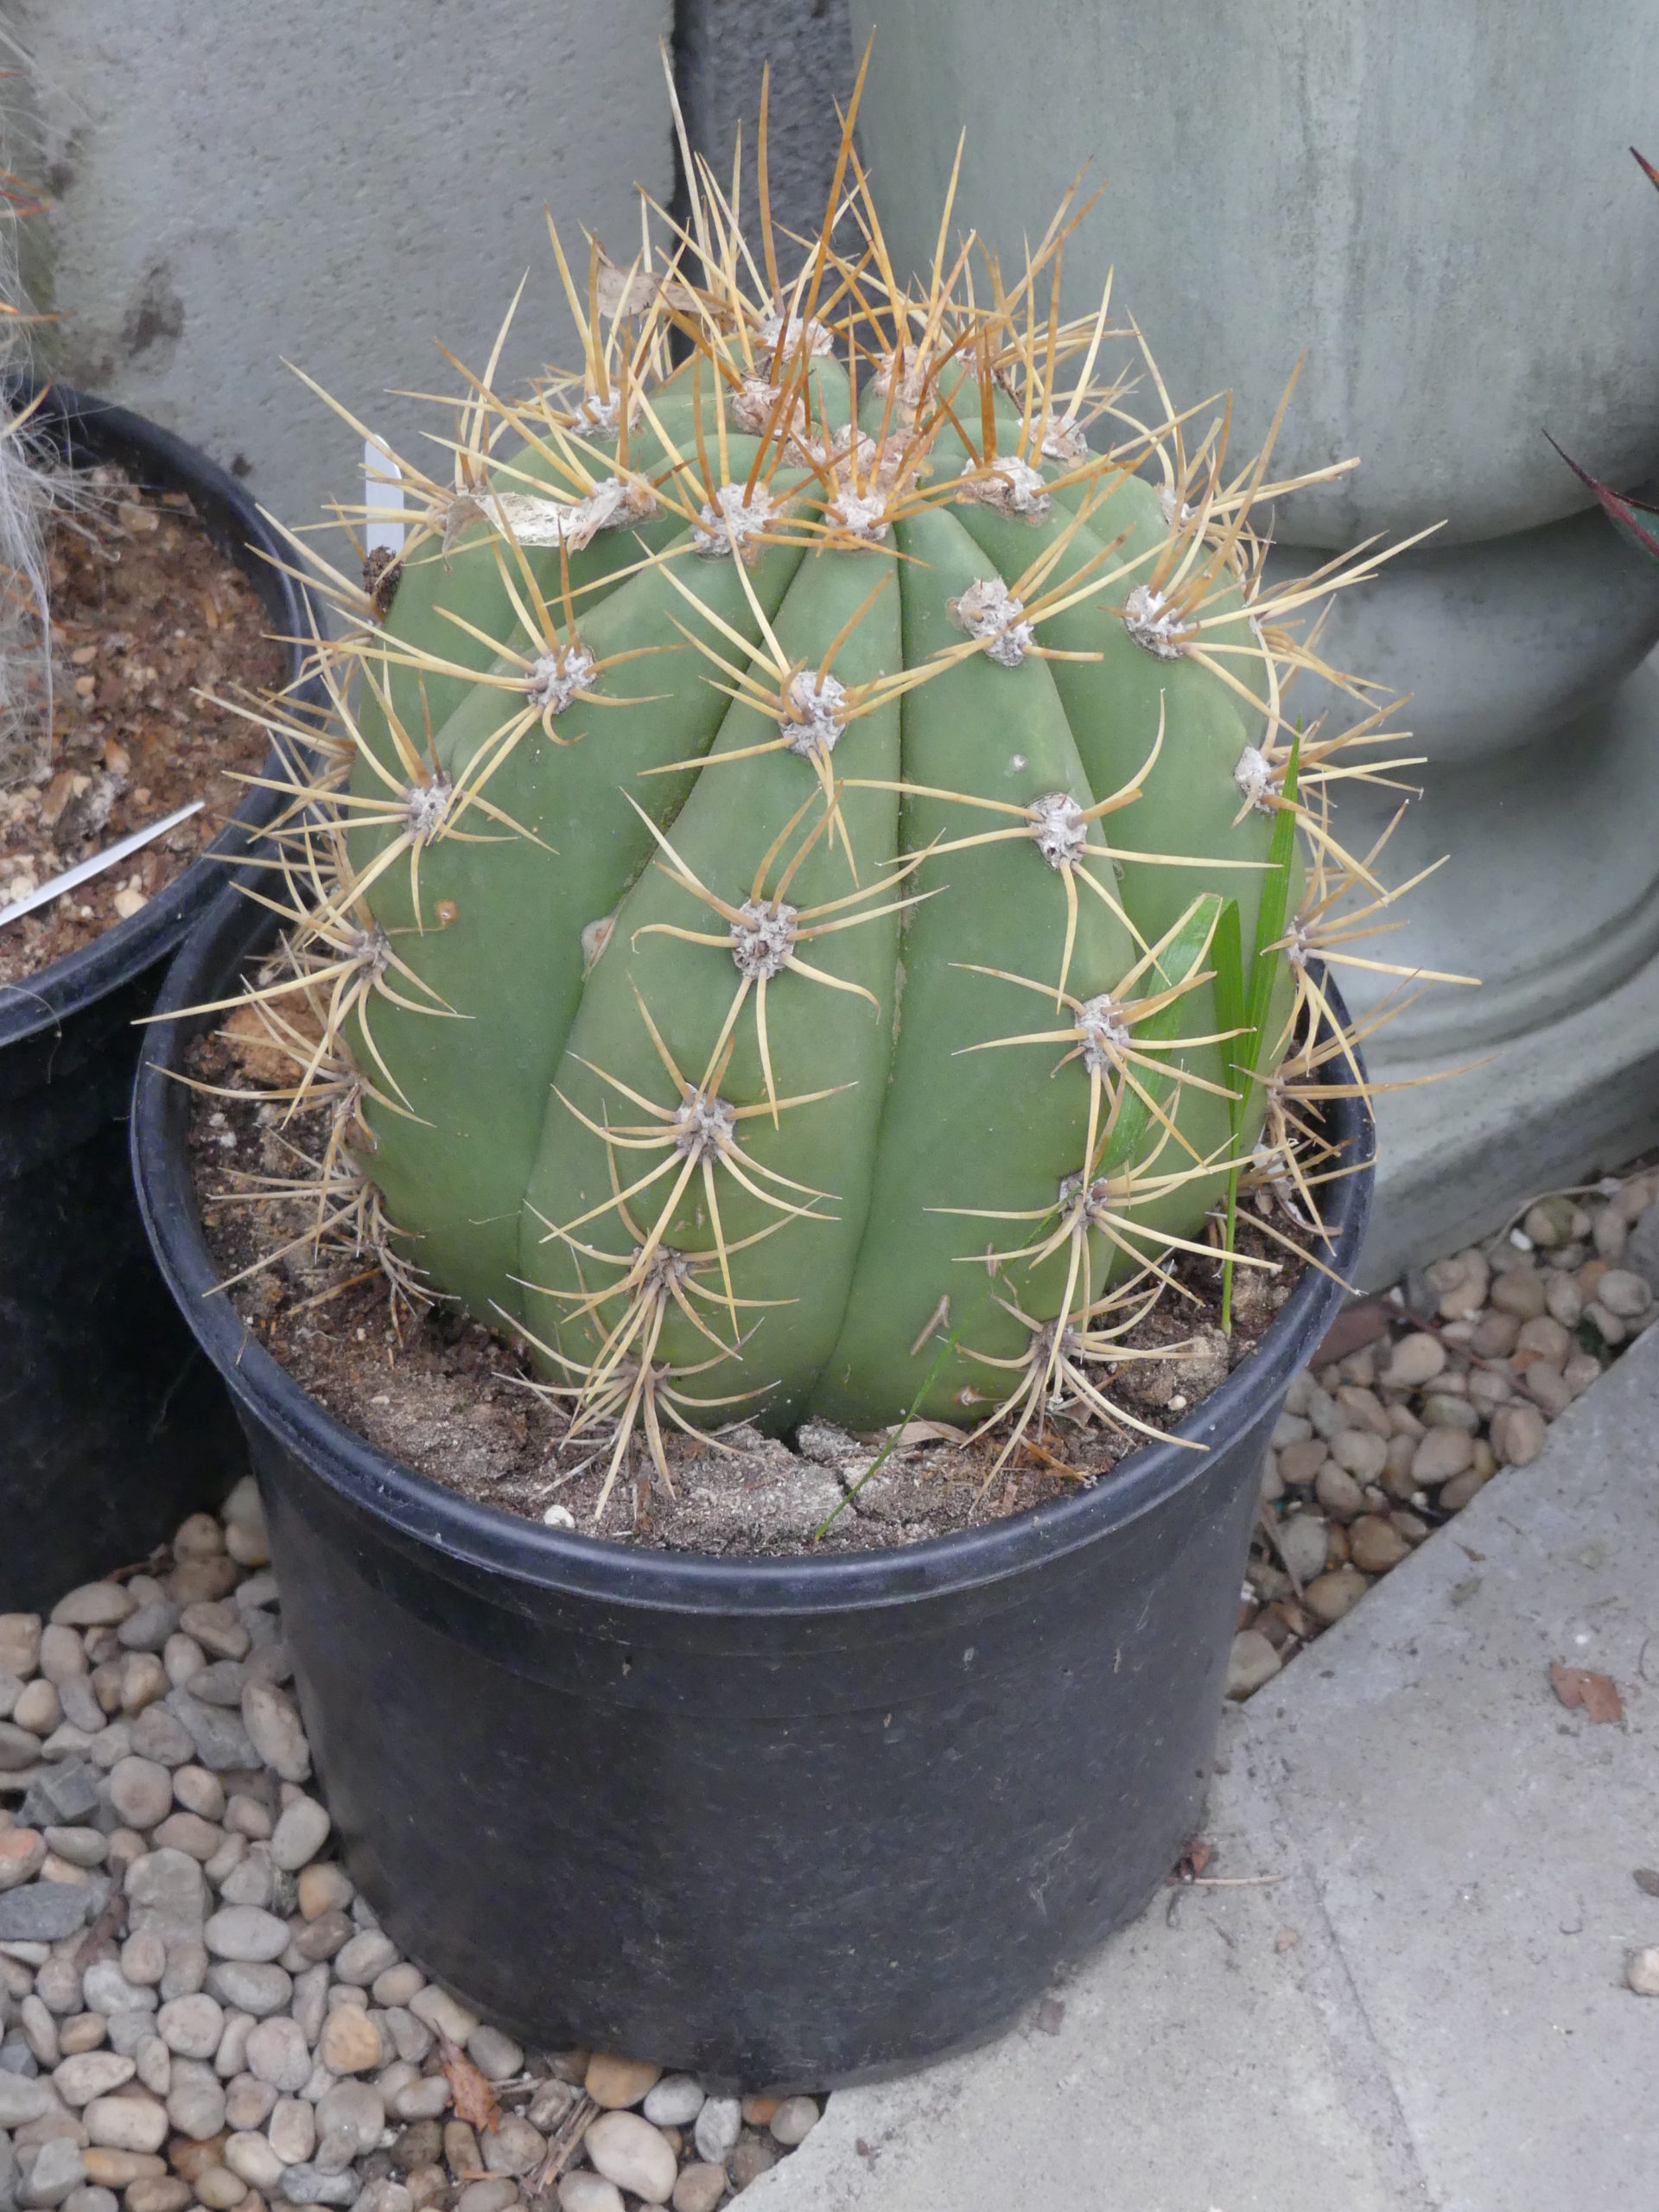 Probably Melocactus gisantes, but not tagged. About $15 in a 6-inch plastic pot.